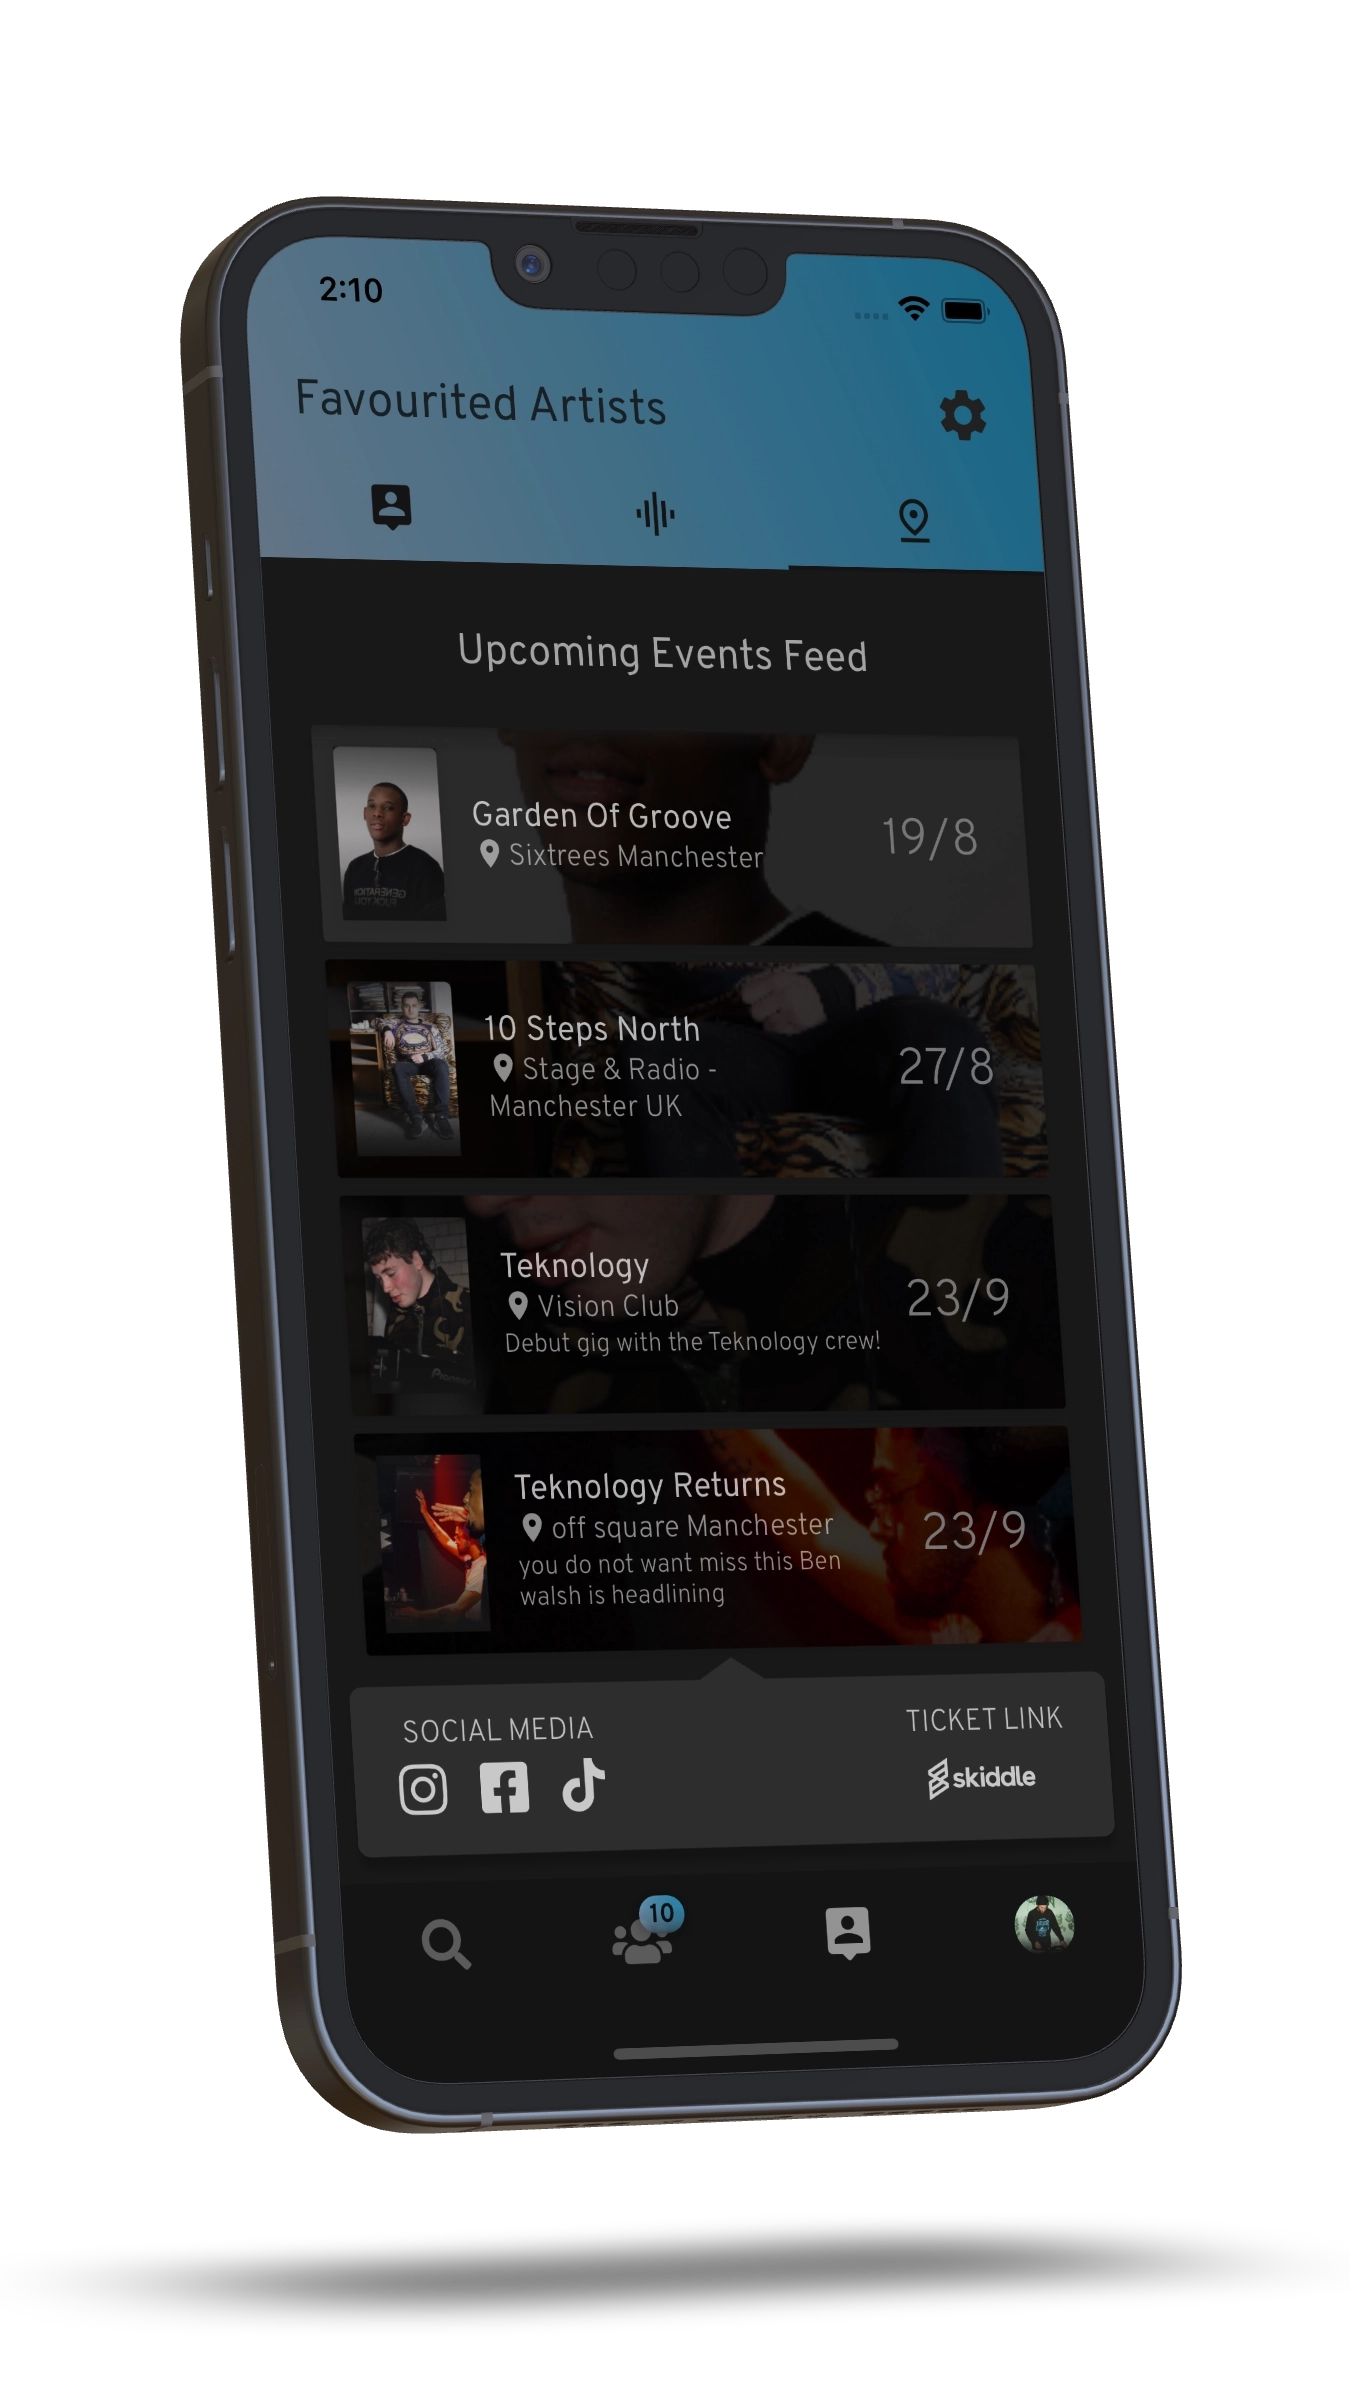 Mobile App Mockup - Events Feed Page